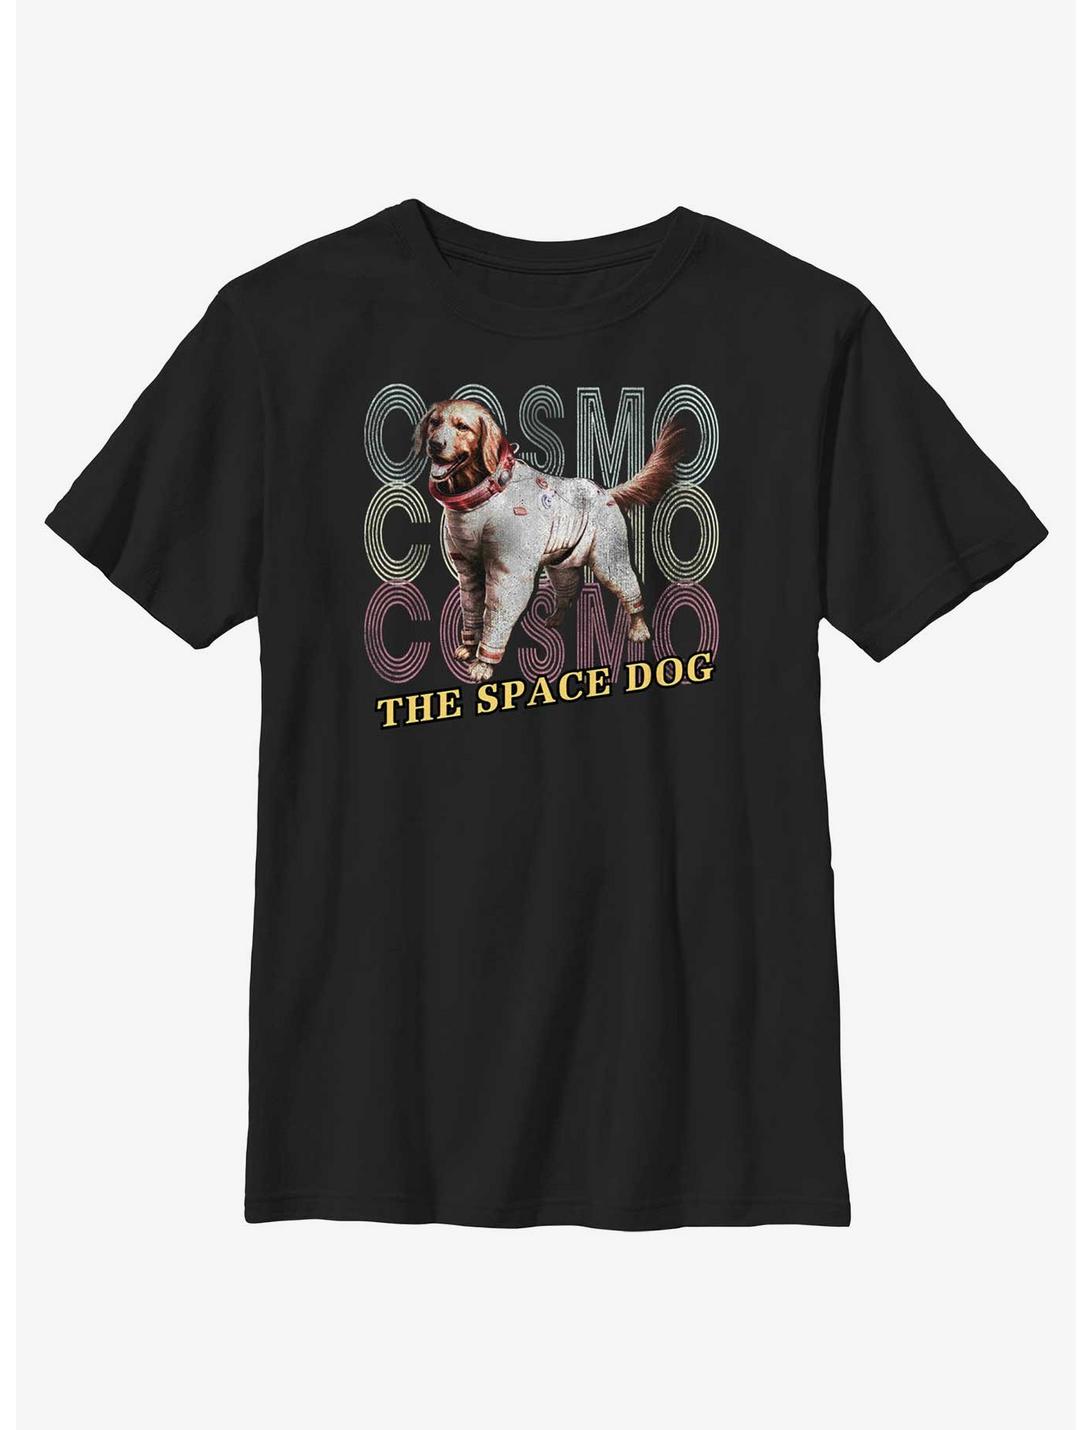 Marvel Guardians of the Galaxy Vol. 3 Space Dog Cosmo Youth T-Shirt, BLACK, hi-res